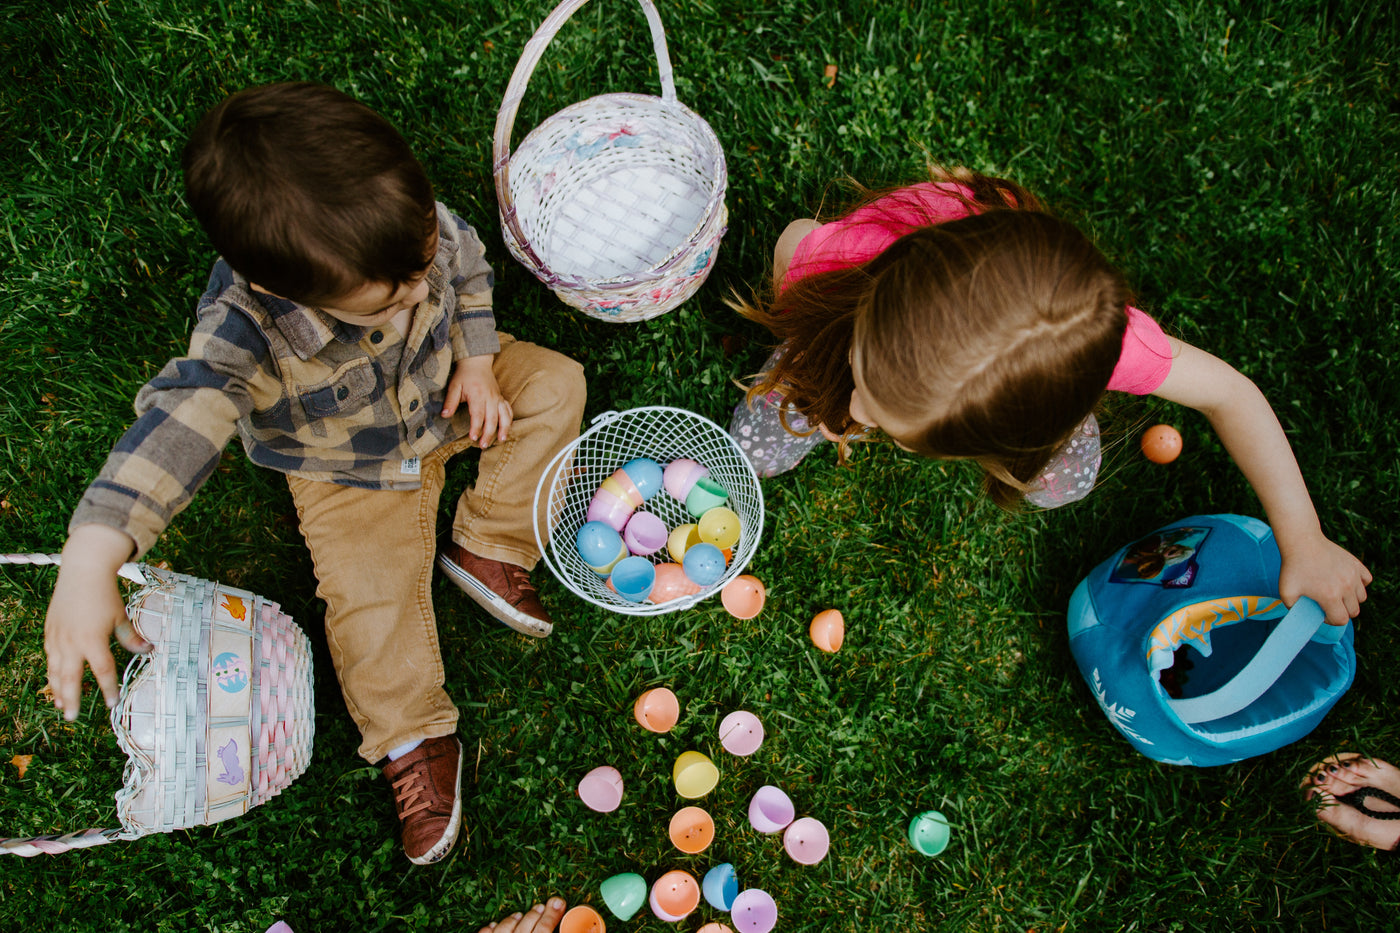 Easter basket ideas for everyone in your family